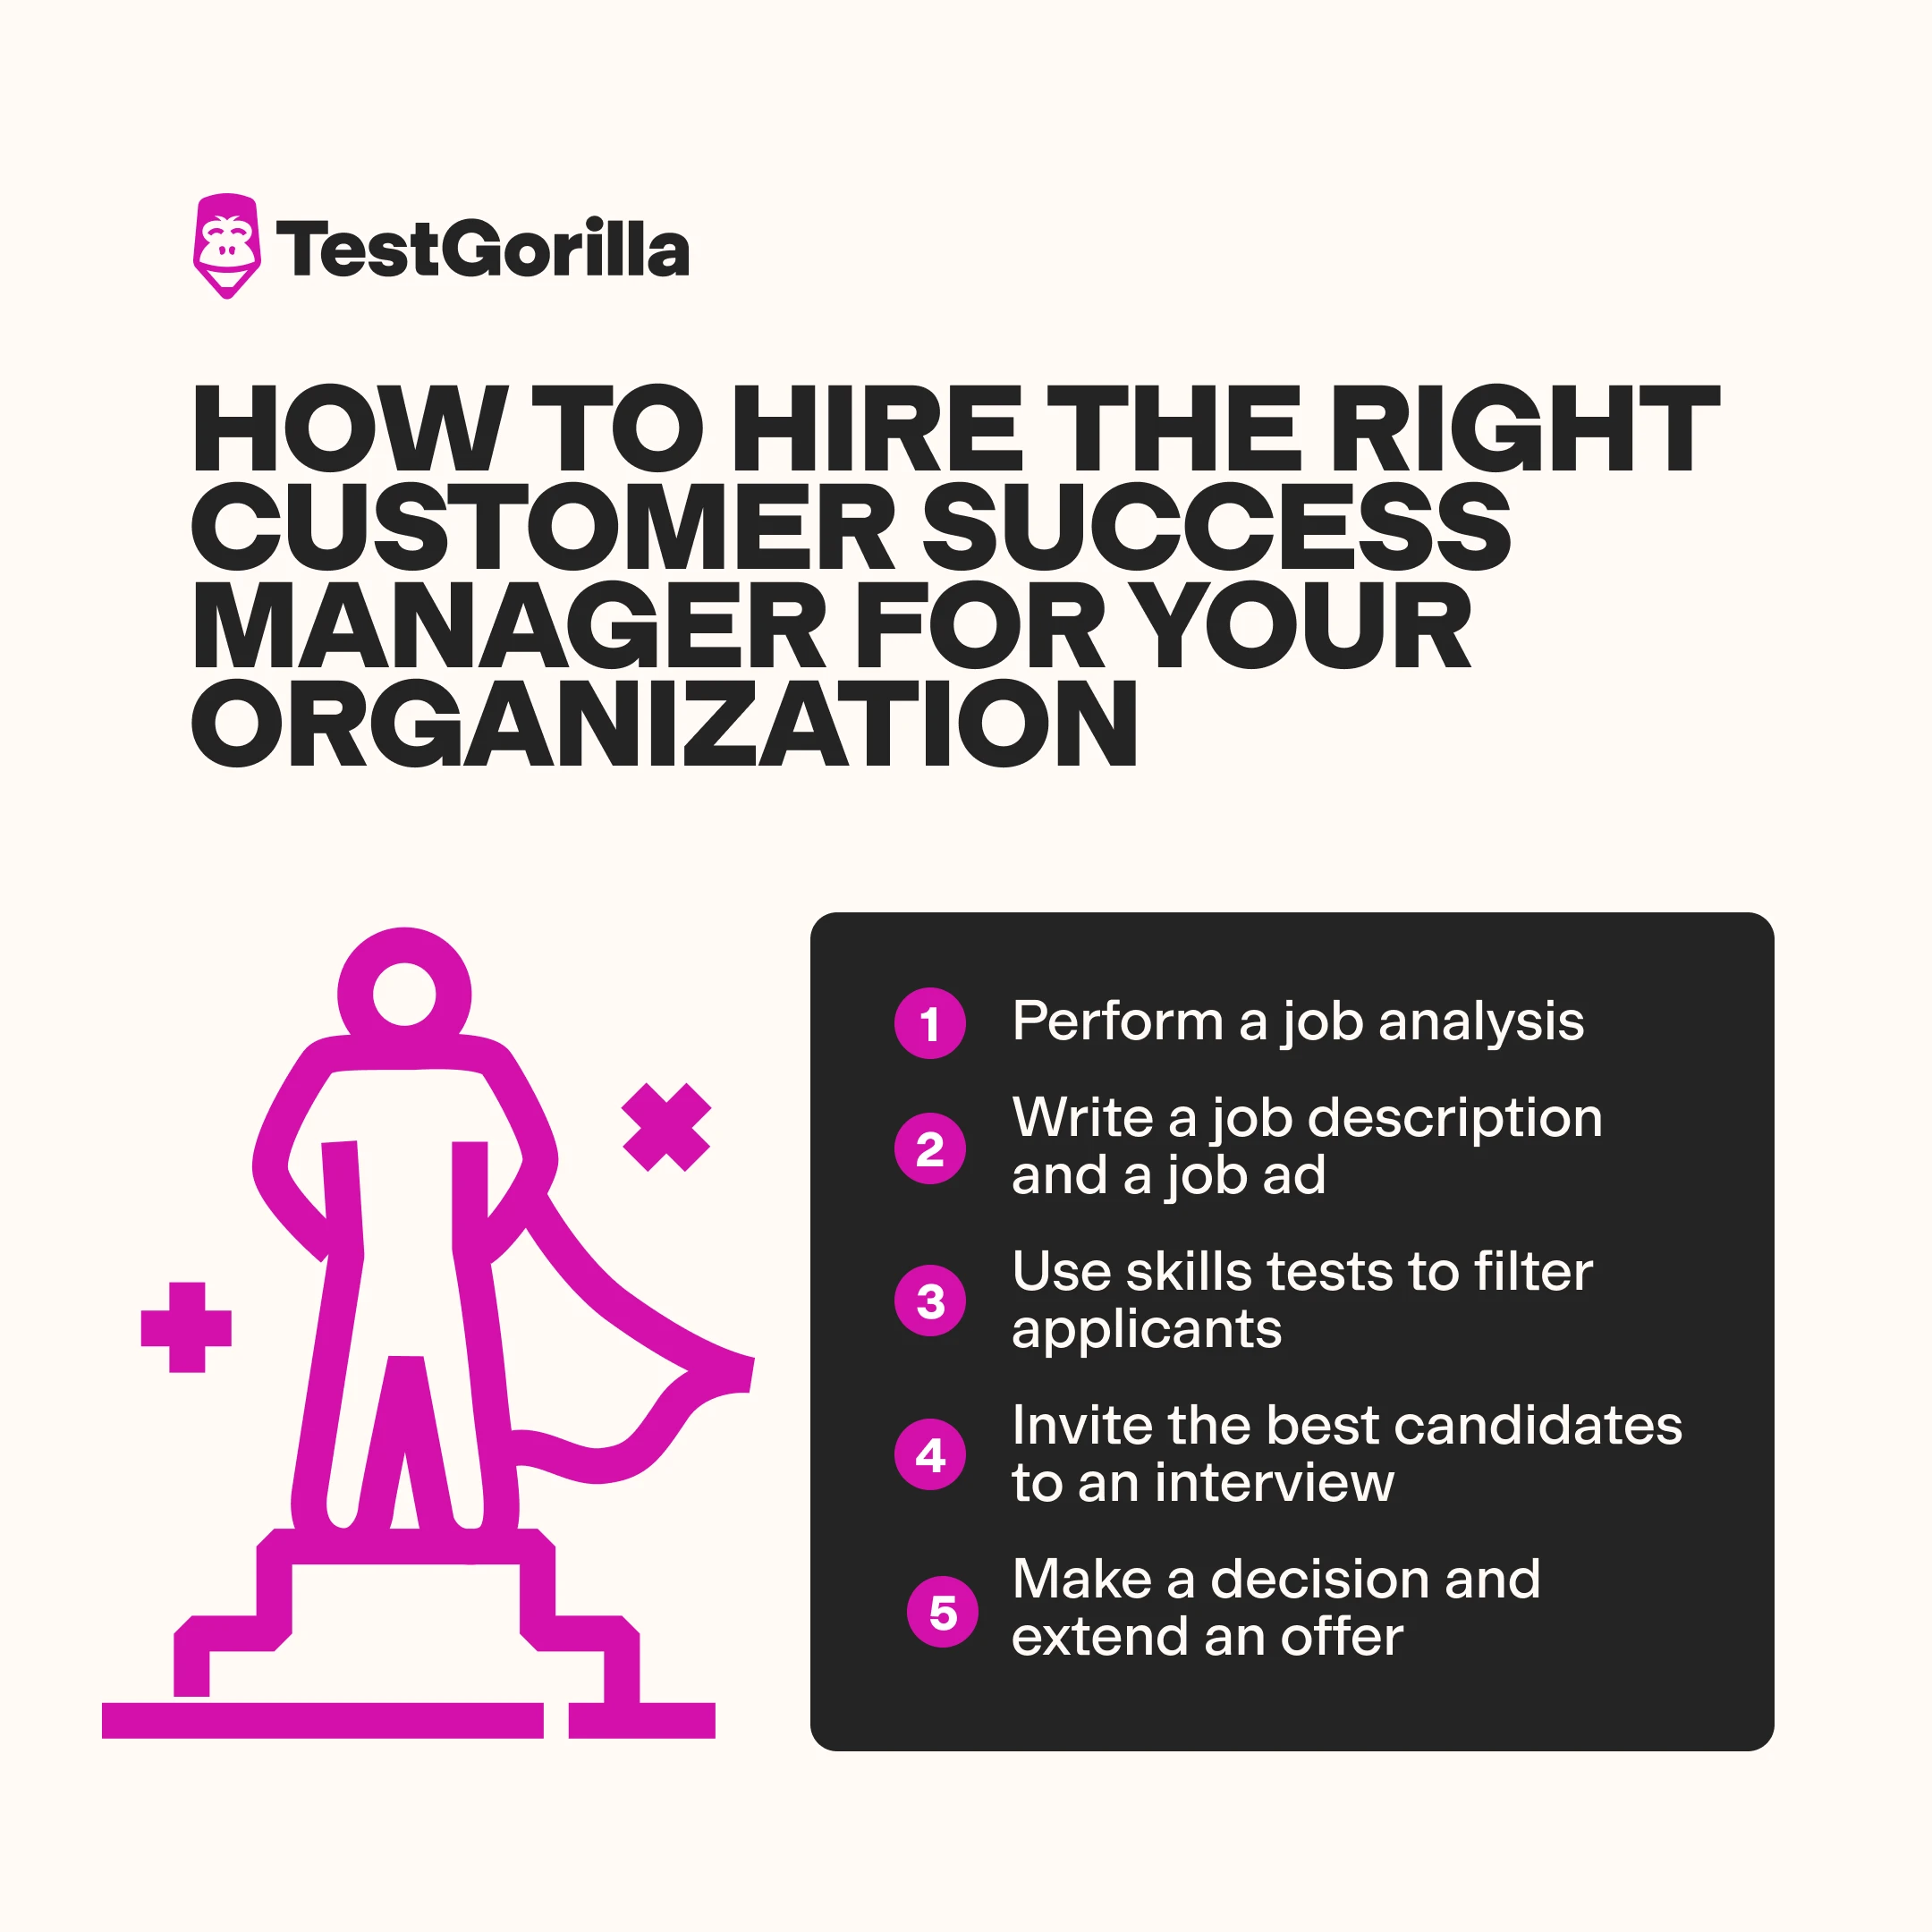 image showing the steps to hire the right customer success manager for your organization